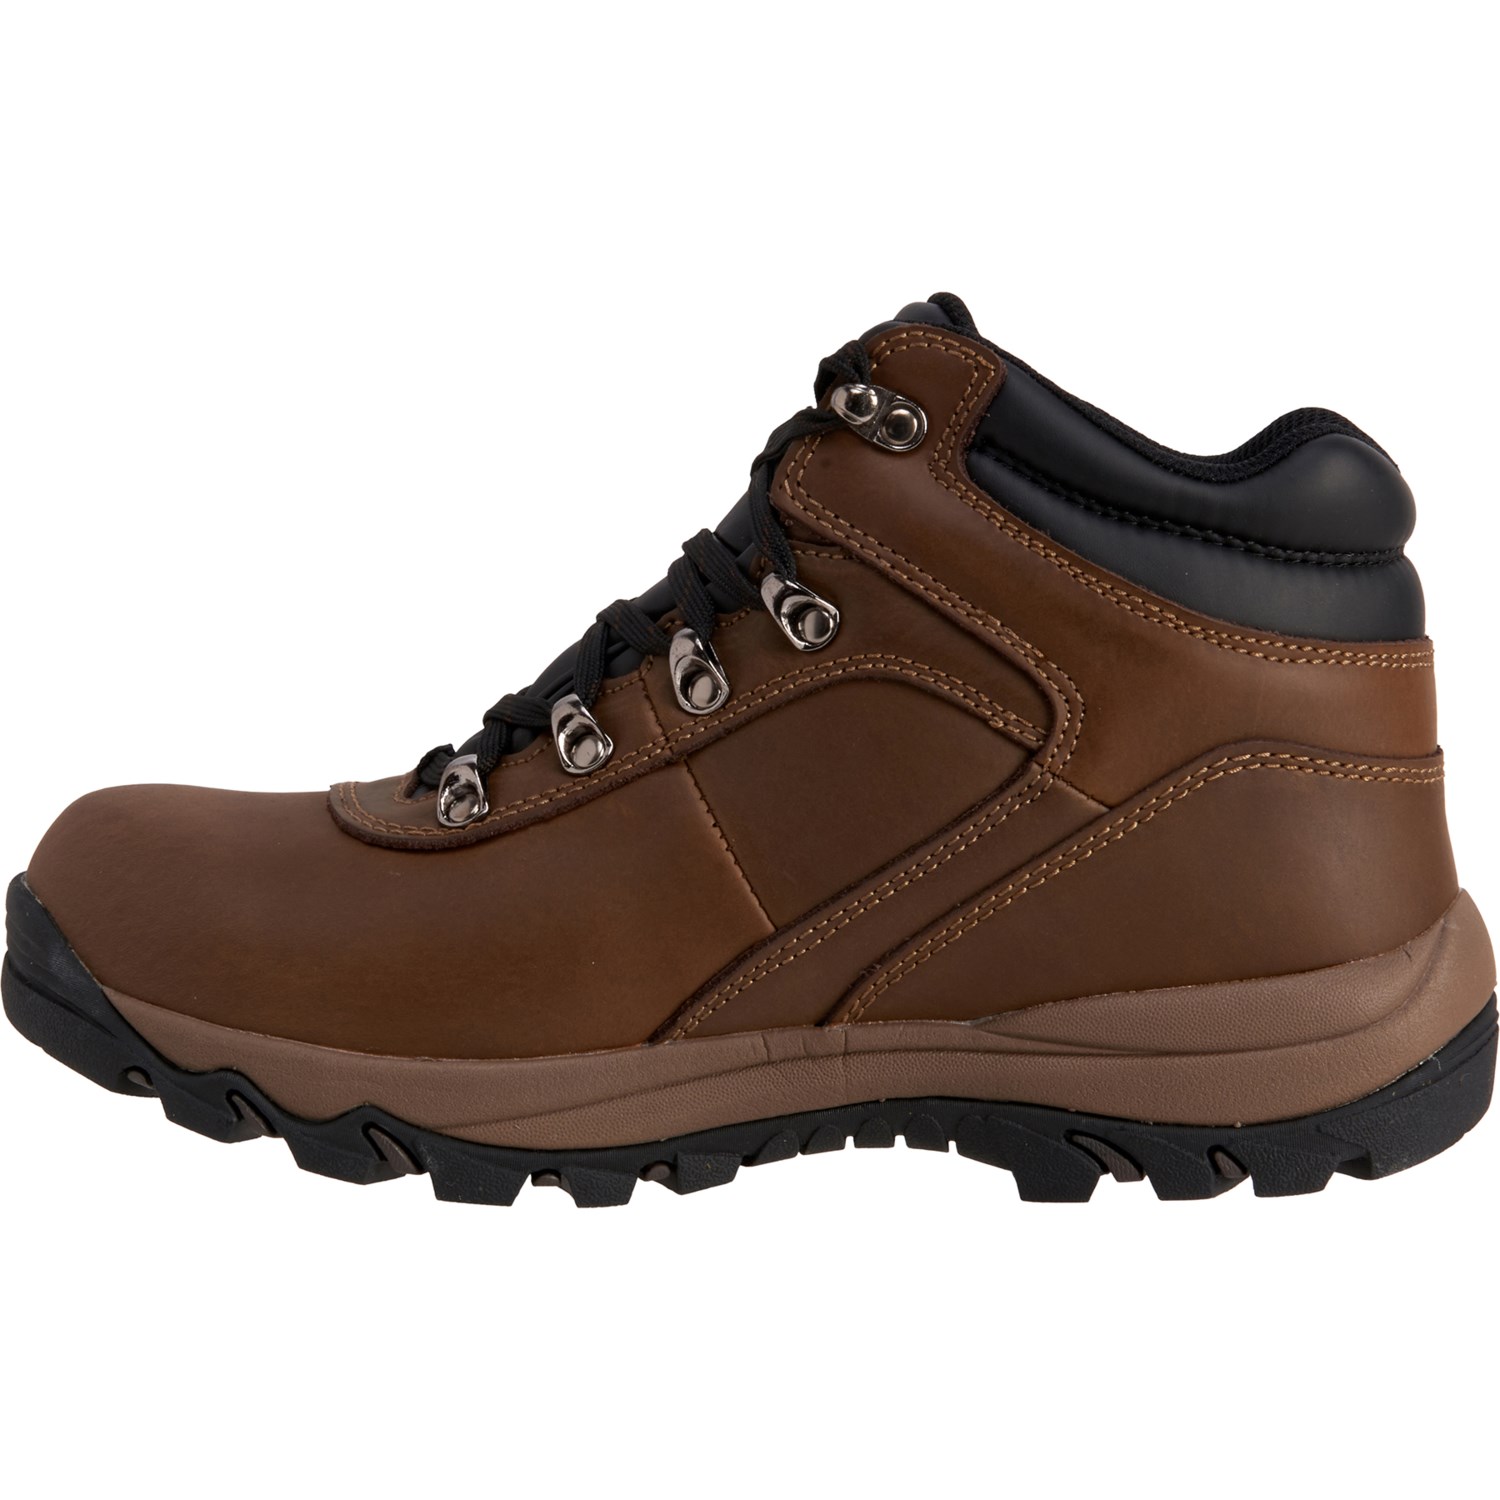 Northside Apex Mid Hiking Boots (For Men) - Save 20%